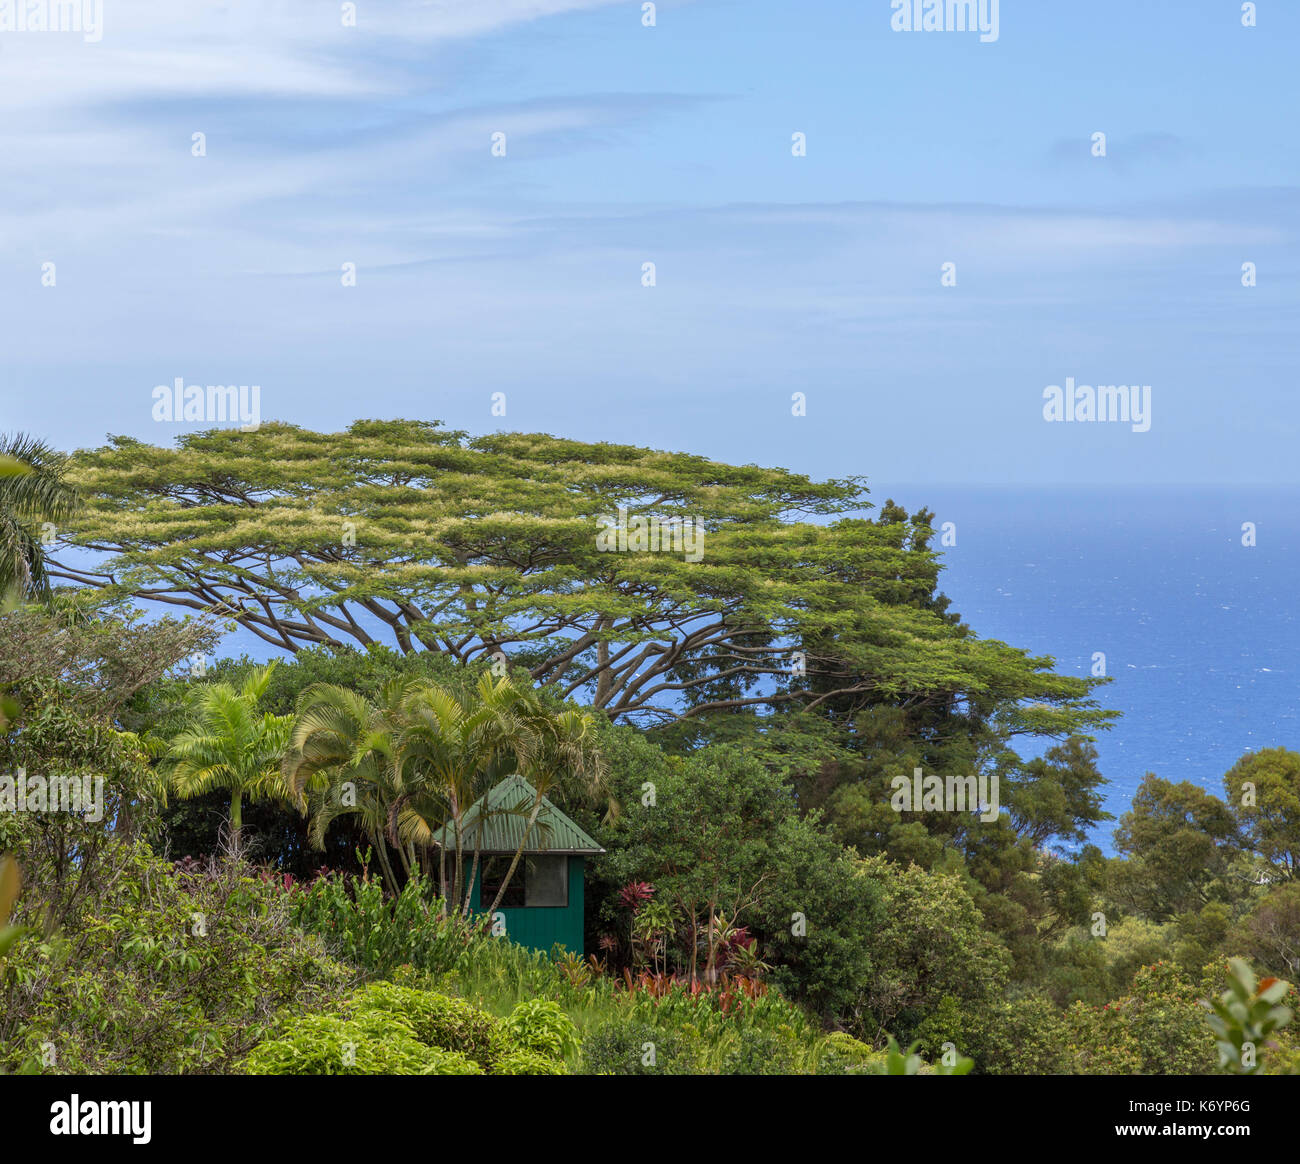 Lush scene over looking ocean. This can be found in the Garden of Eden,a stop along the road to Hana. Maui, Hawaii. Stock Photo